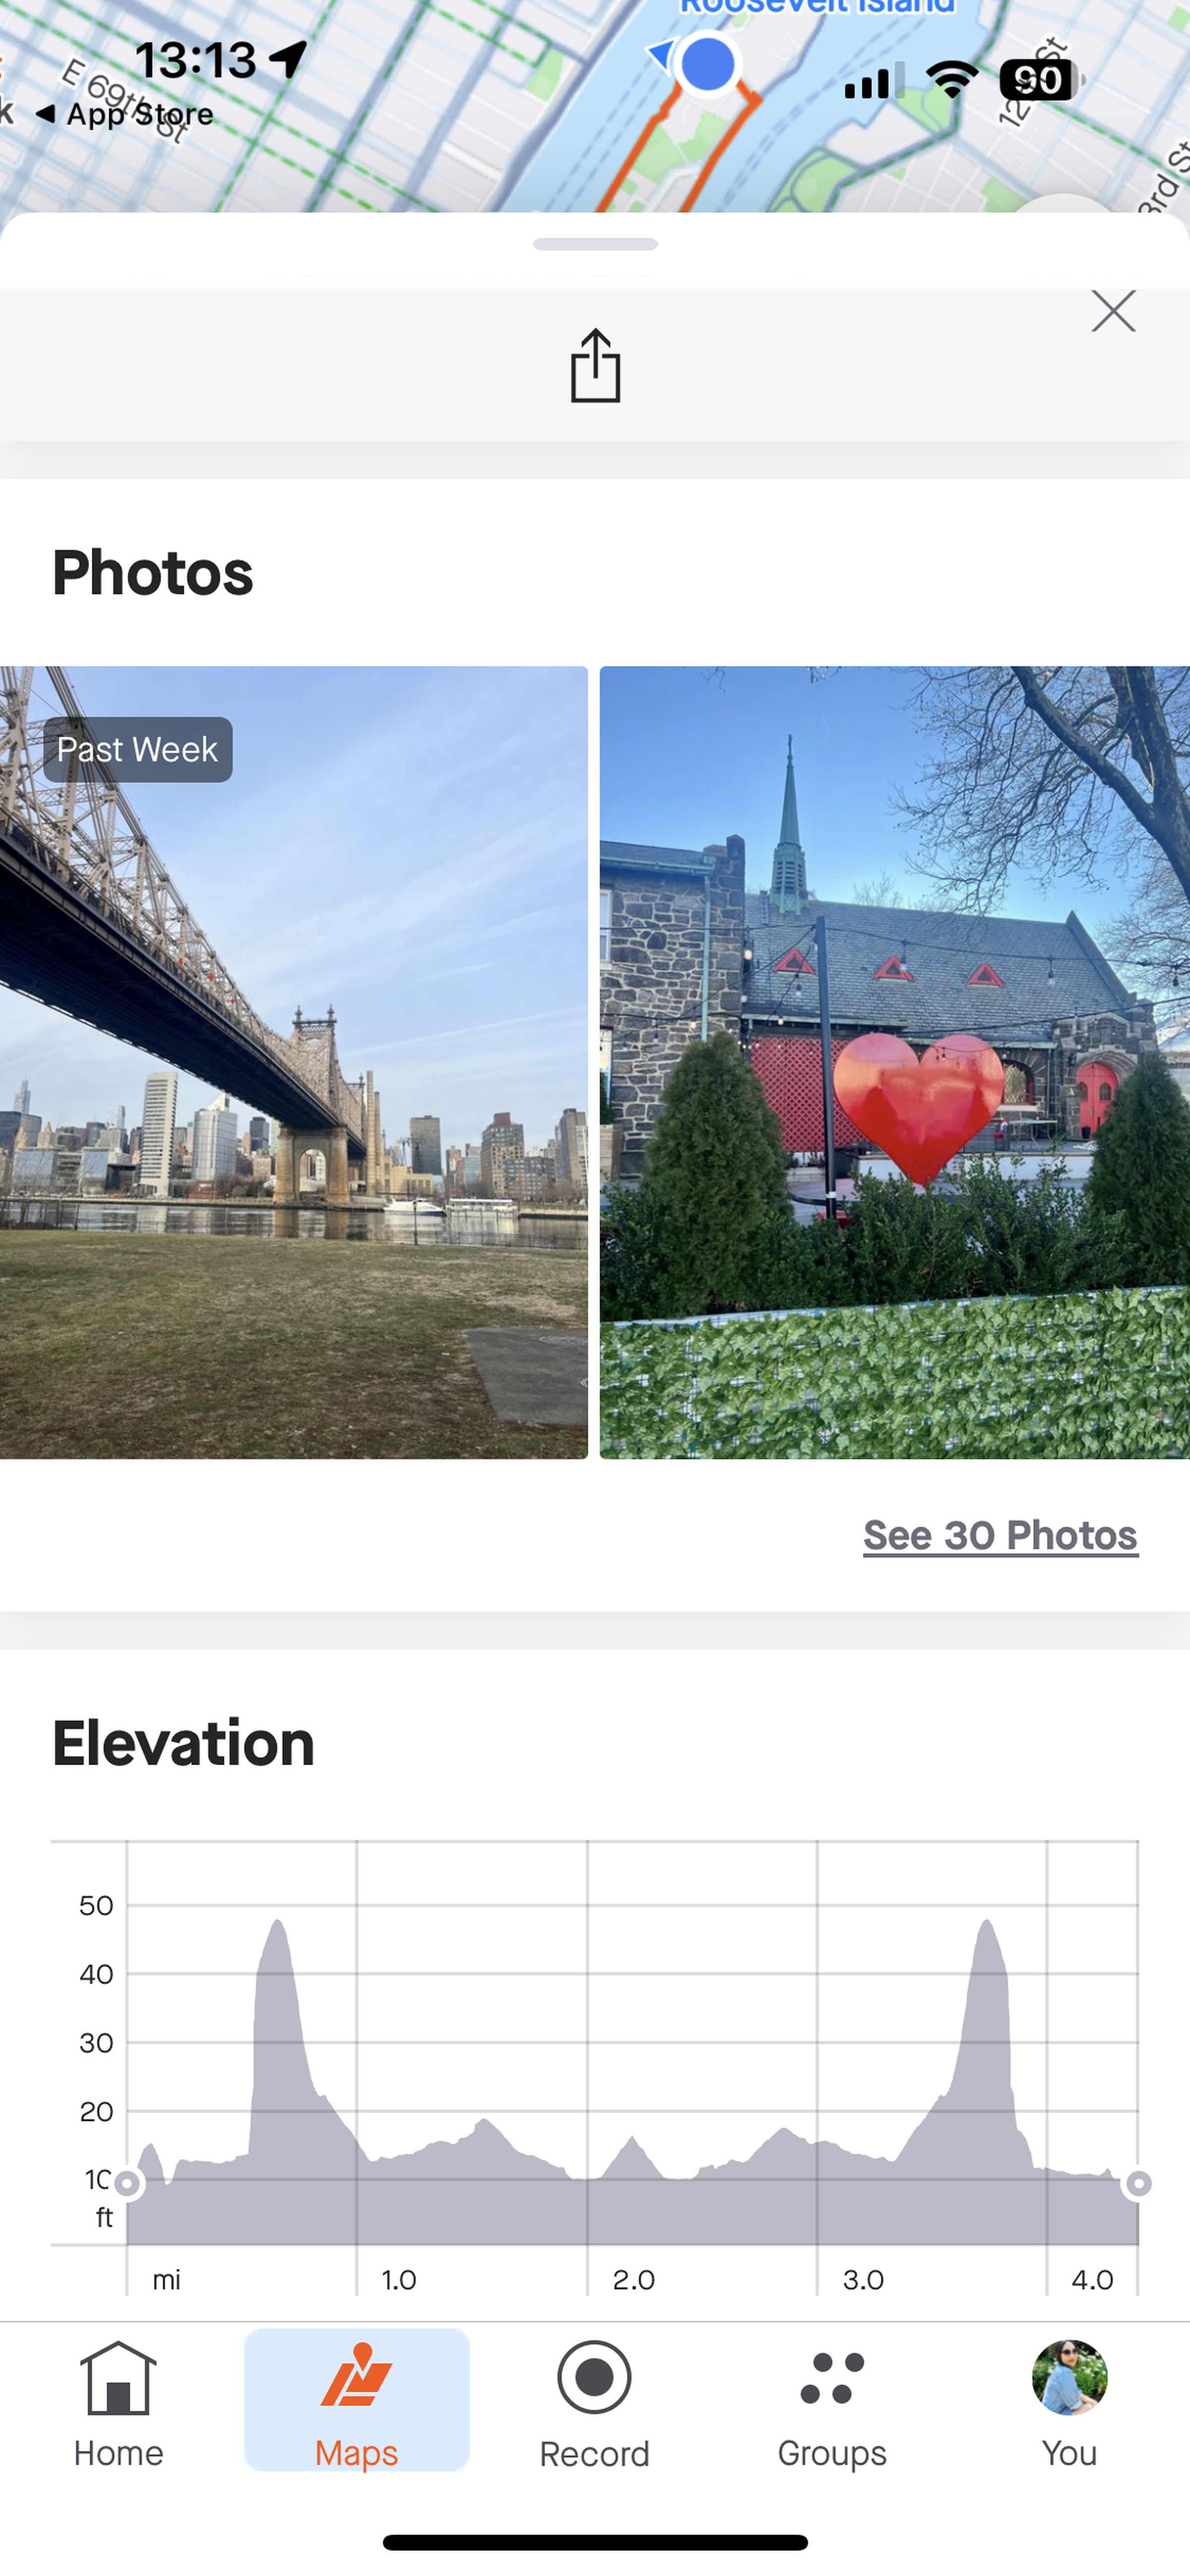 Screenshot of recommended routes photos showing a building with a large metal heart in front of it.